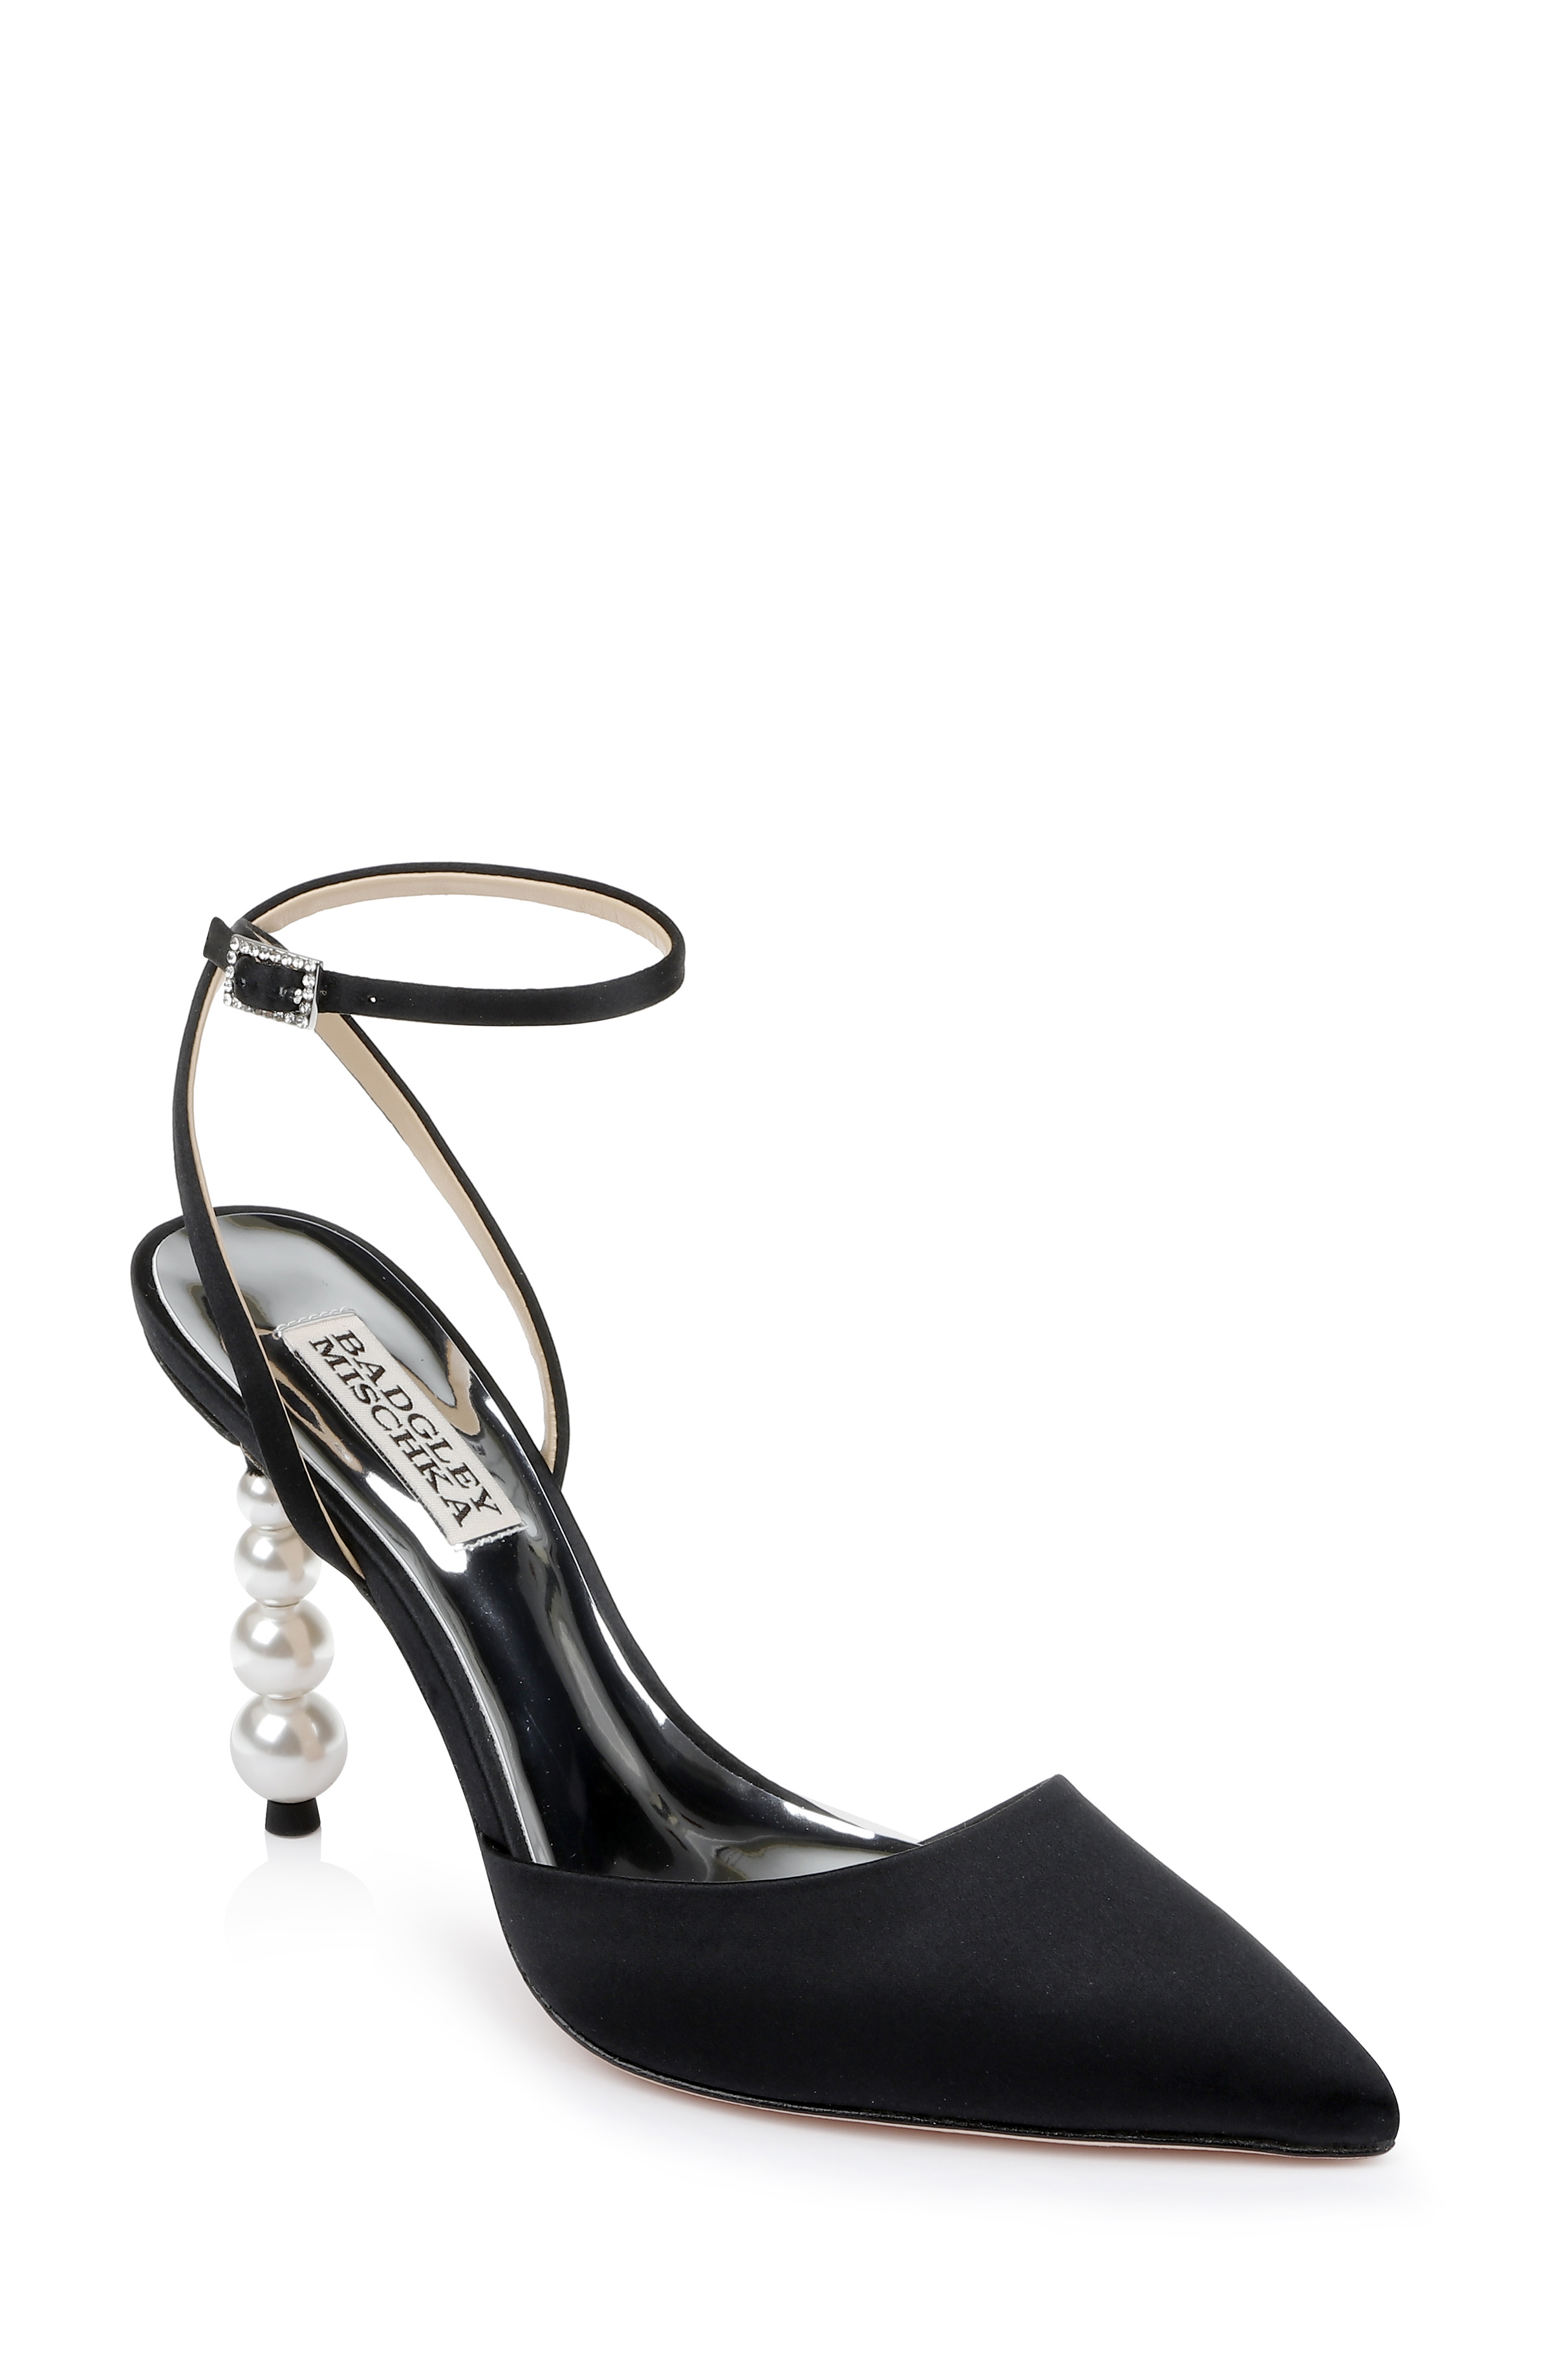 Satin Wedding Shoes Mid Heel Pearl Ankle Strap Pointed Toe D'rosay